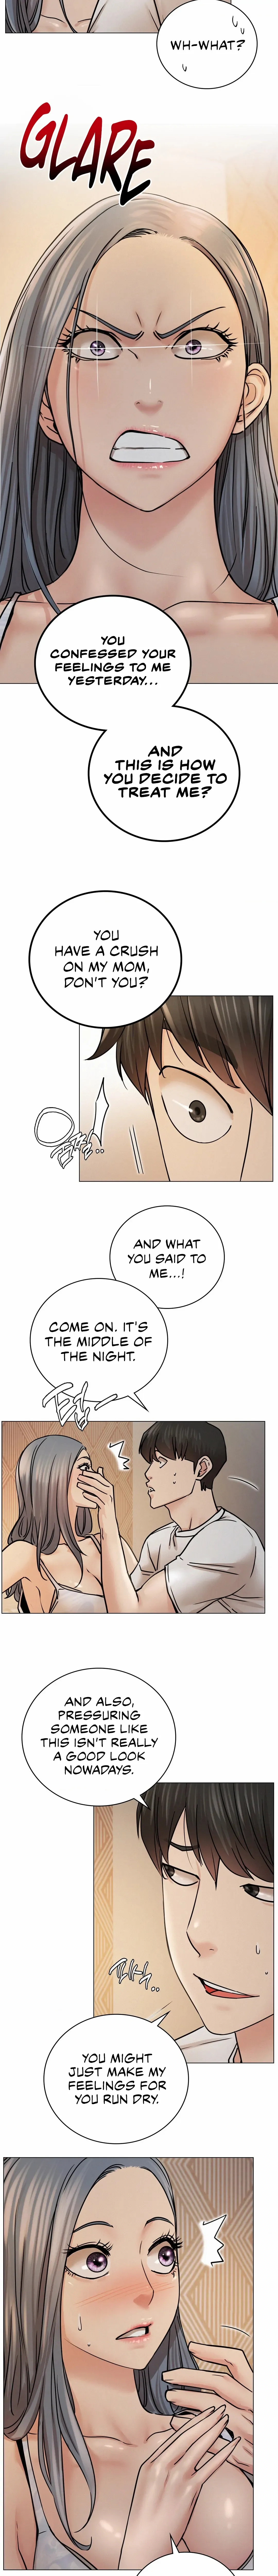 Staying With Ajumma - Page 4